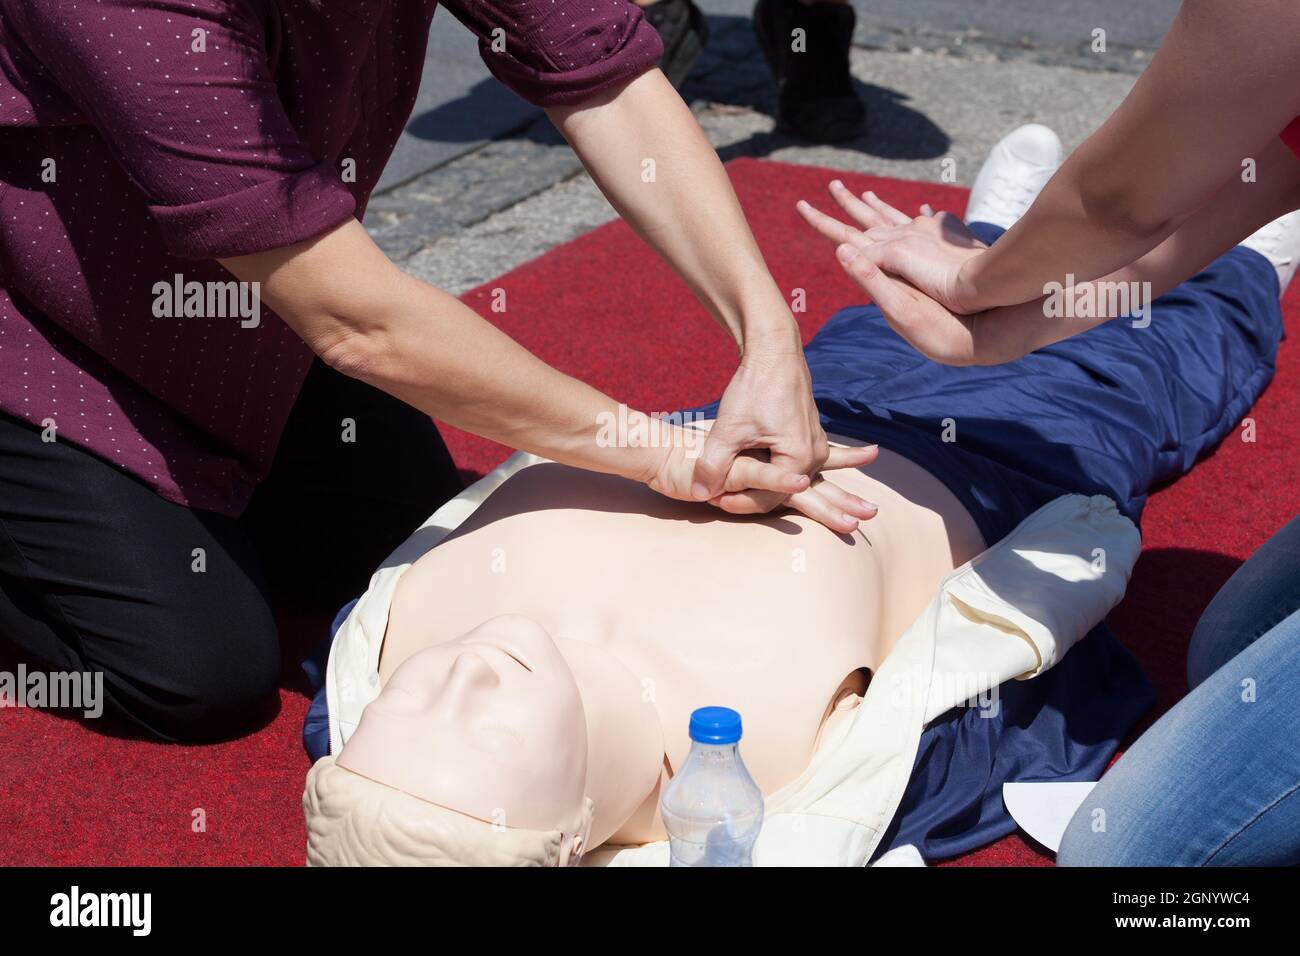 First aid CPR training detail Stock Photo